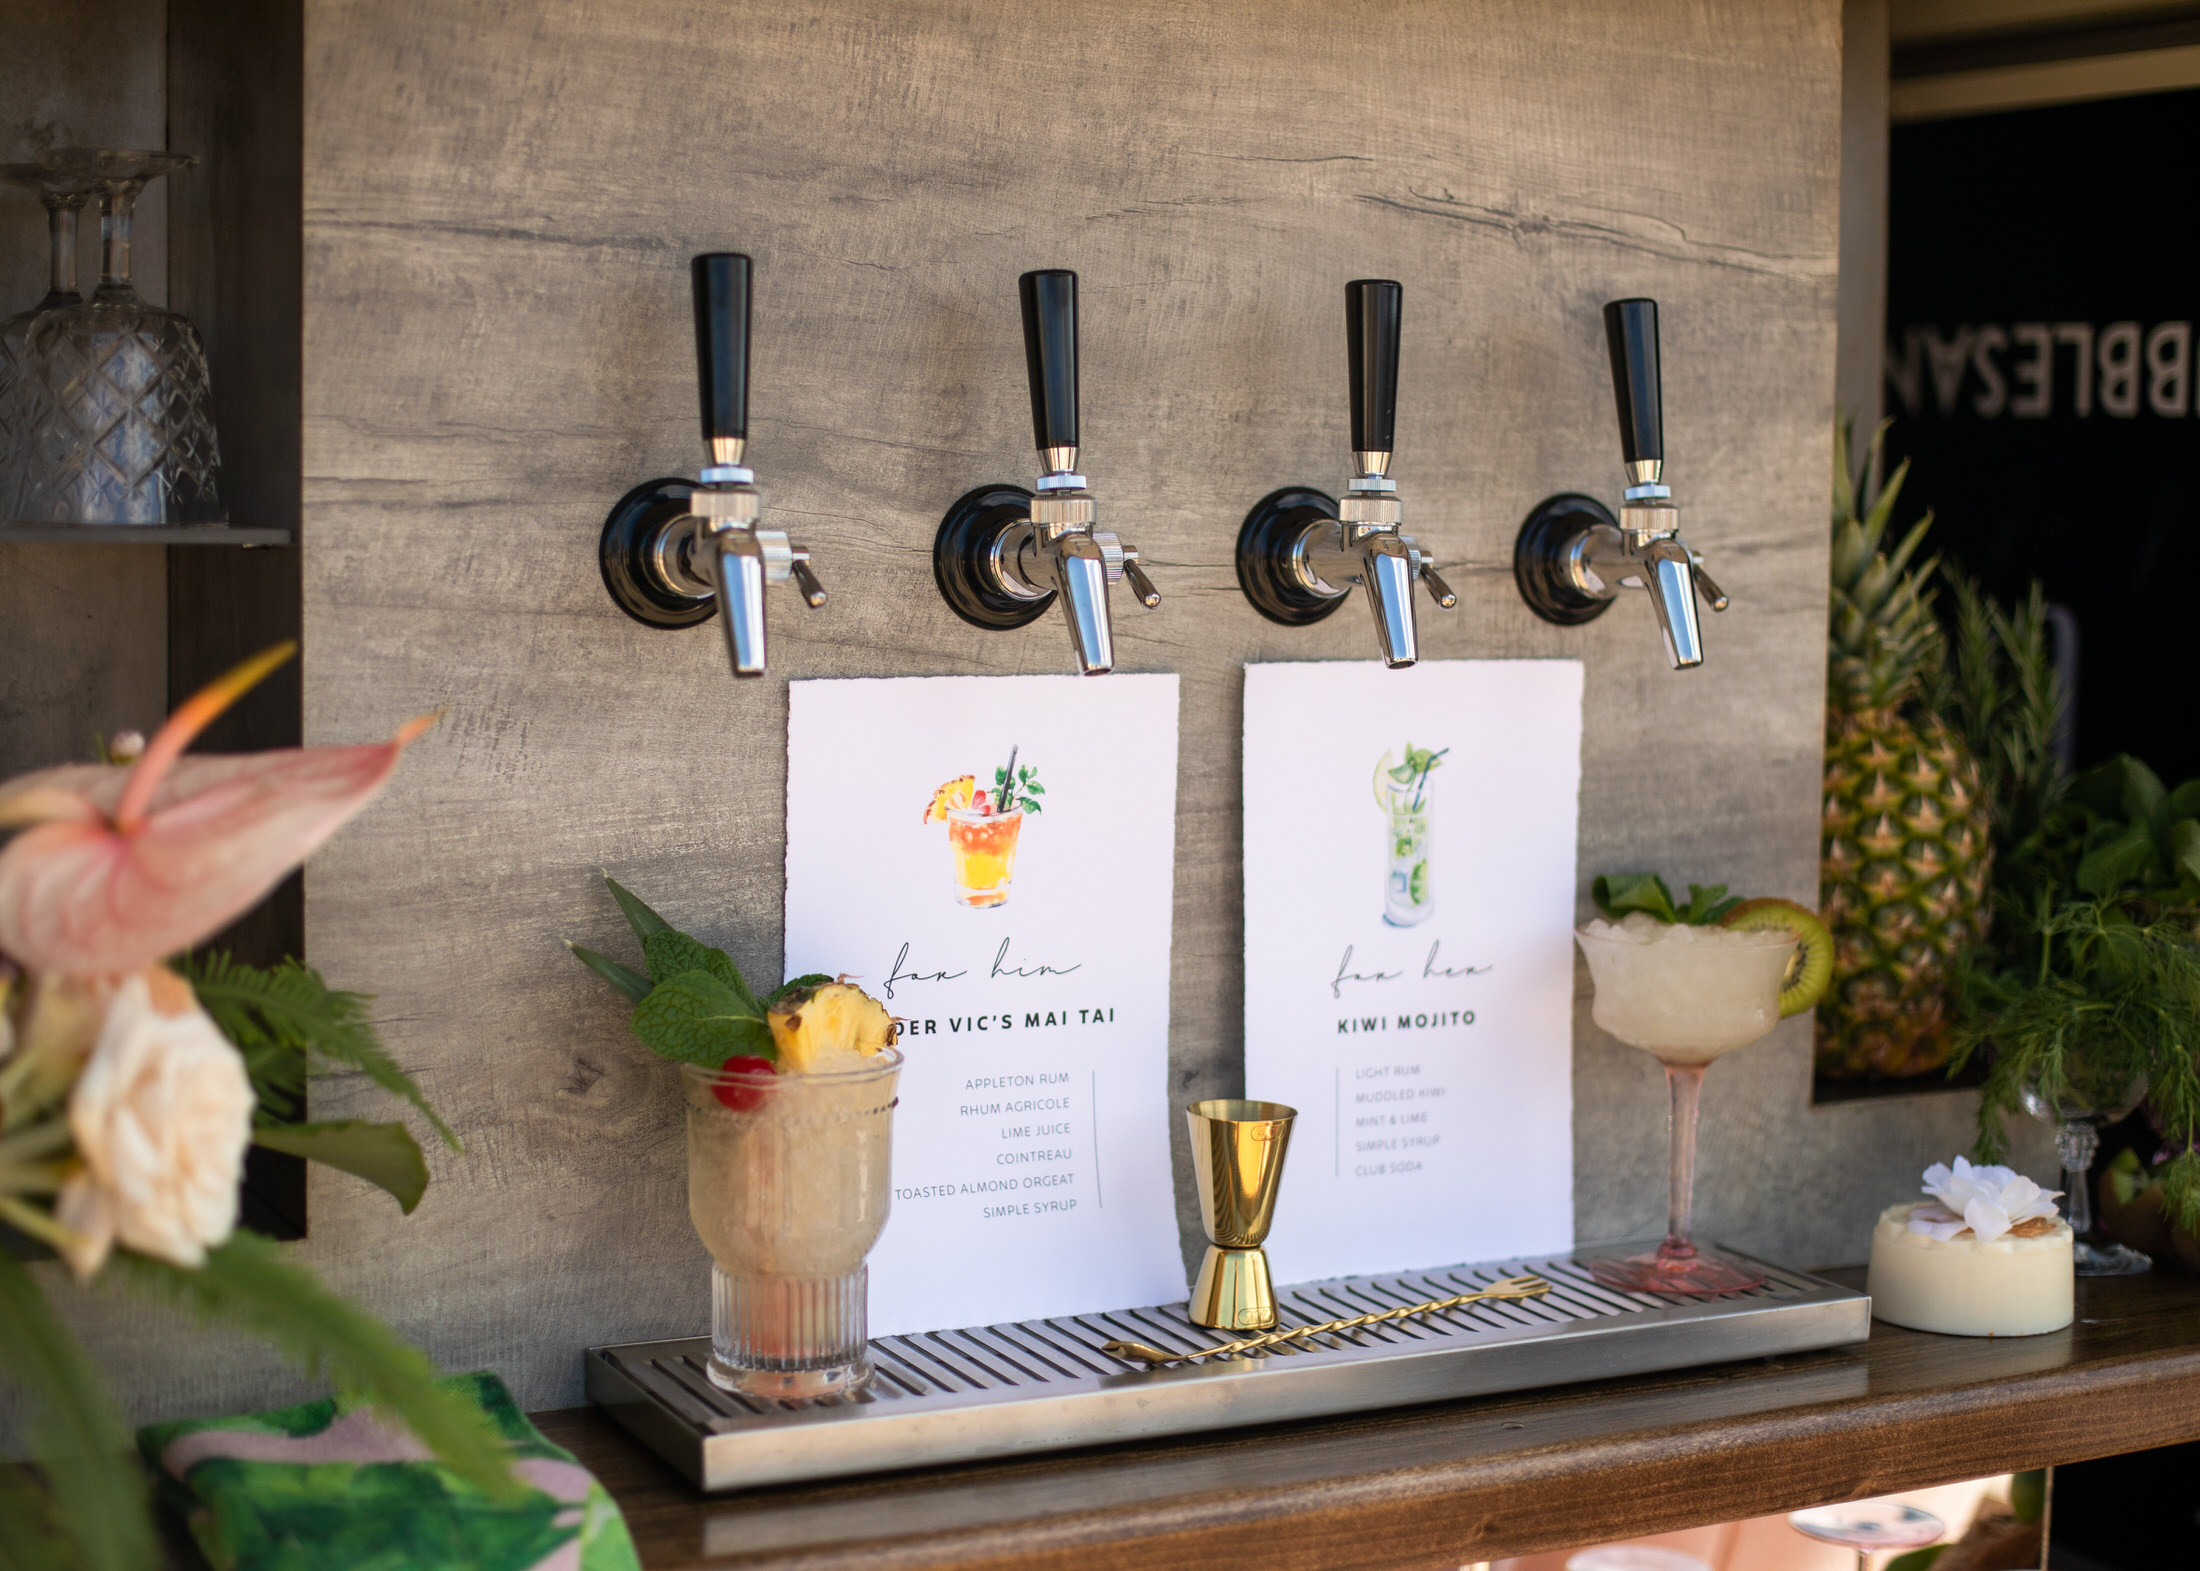 Signature cocktails at a tropical themed wedding.